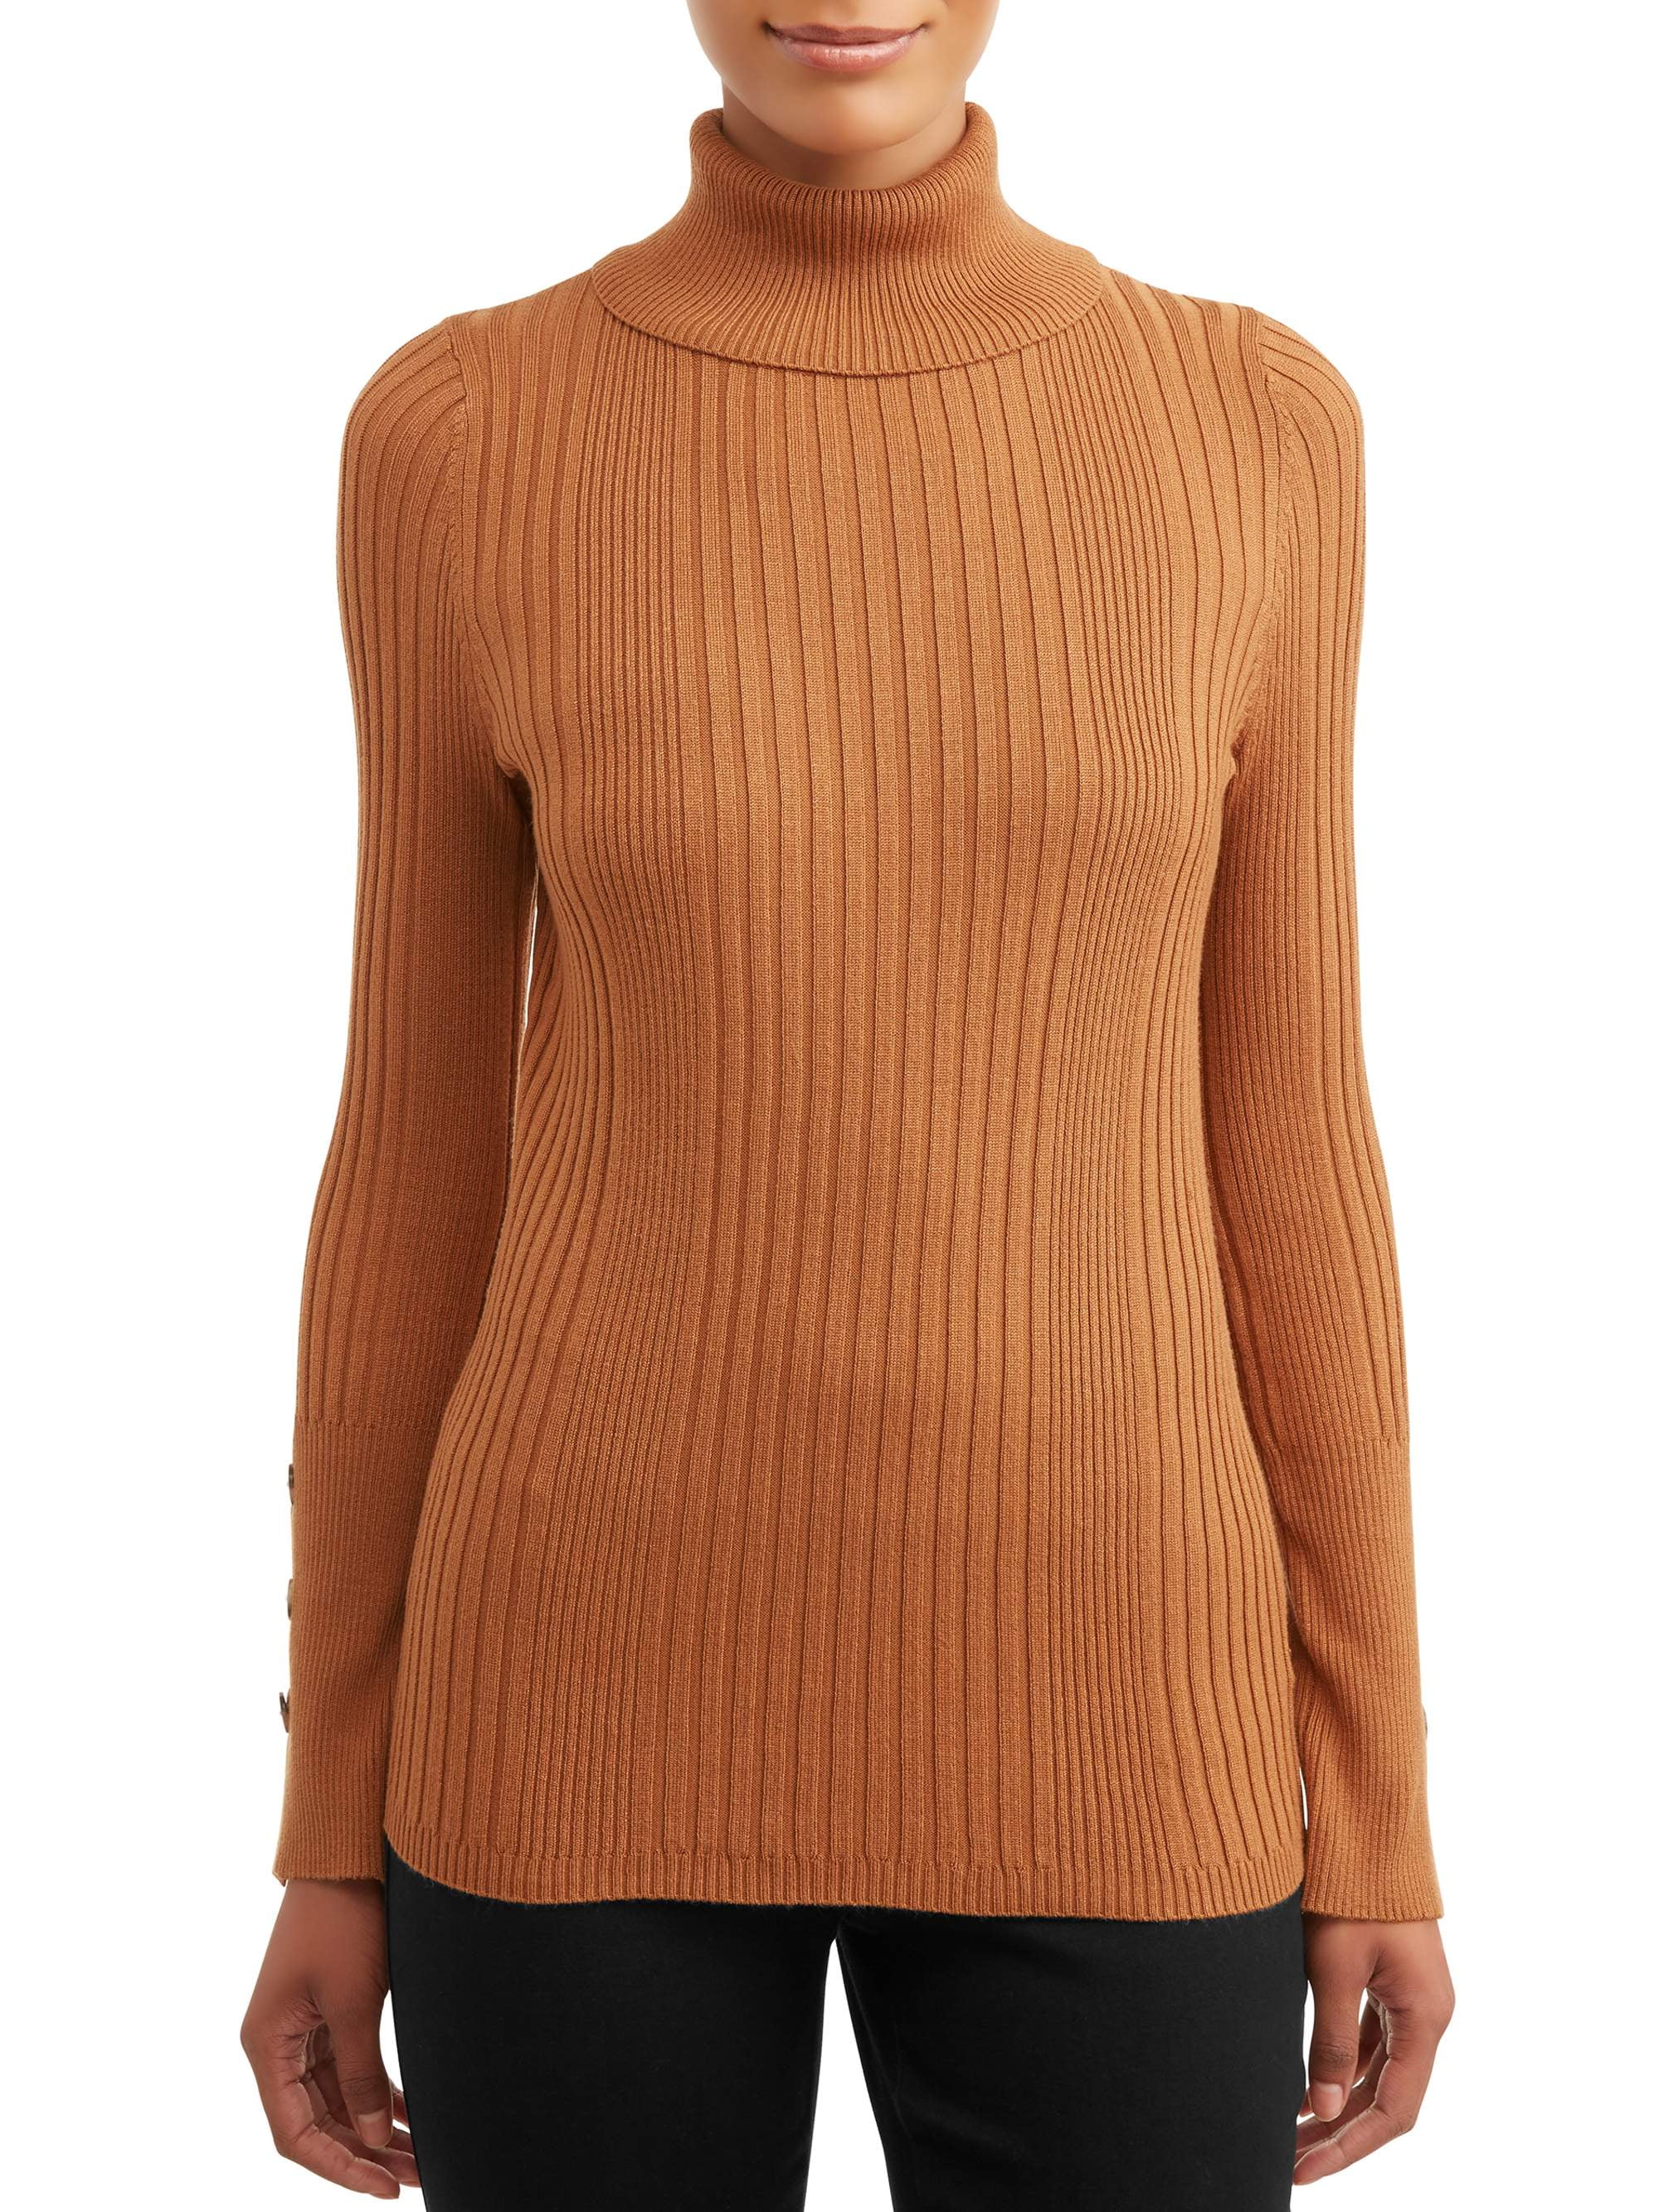 Time and Tru - Time and Tru Women's Ribbed Turtleneck Sweater - Walmart ...